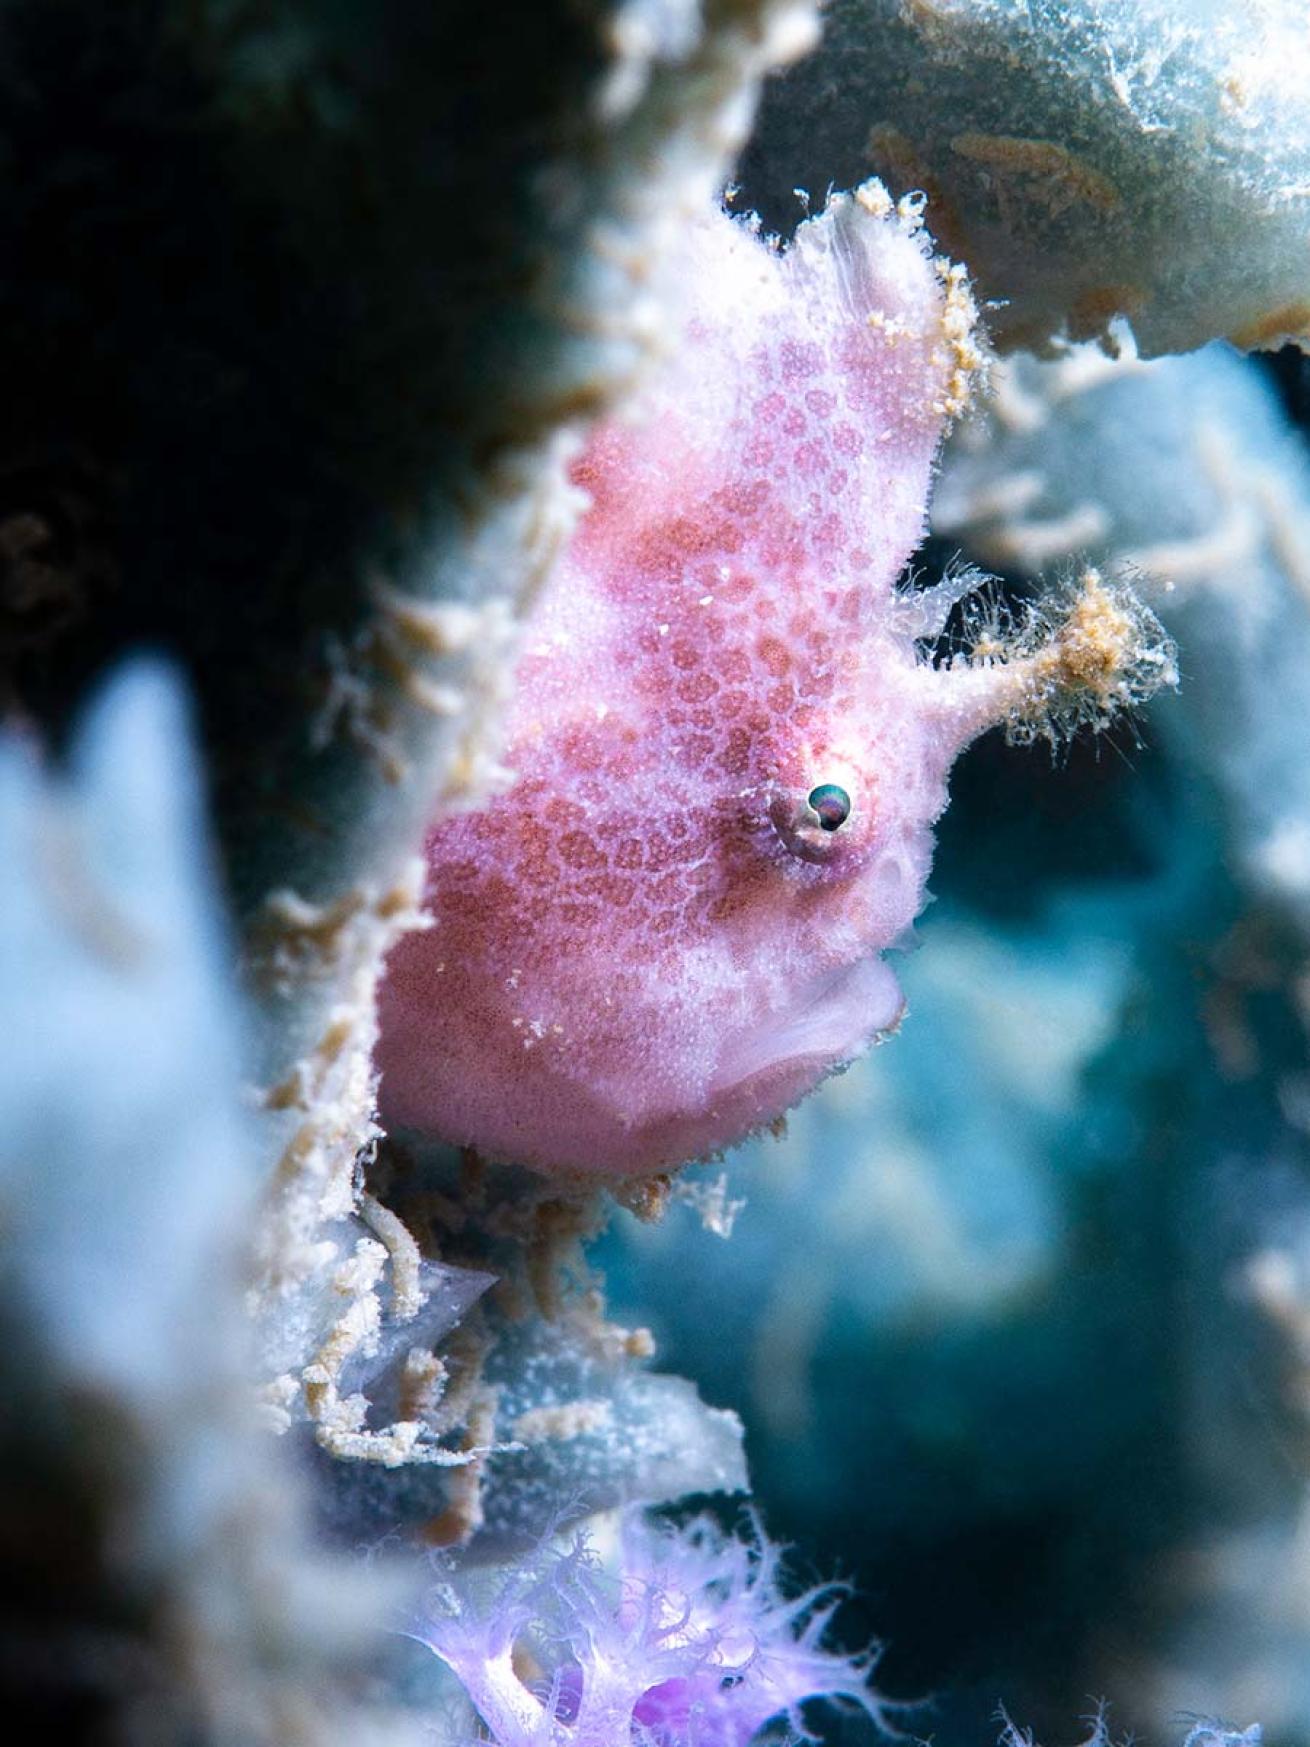 Spotted frogfish